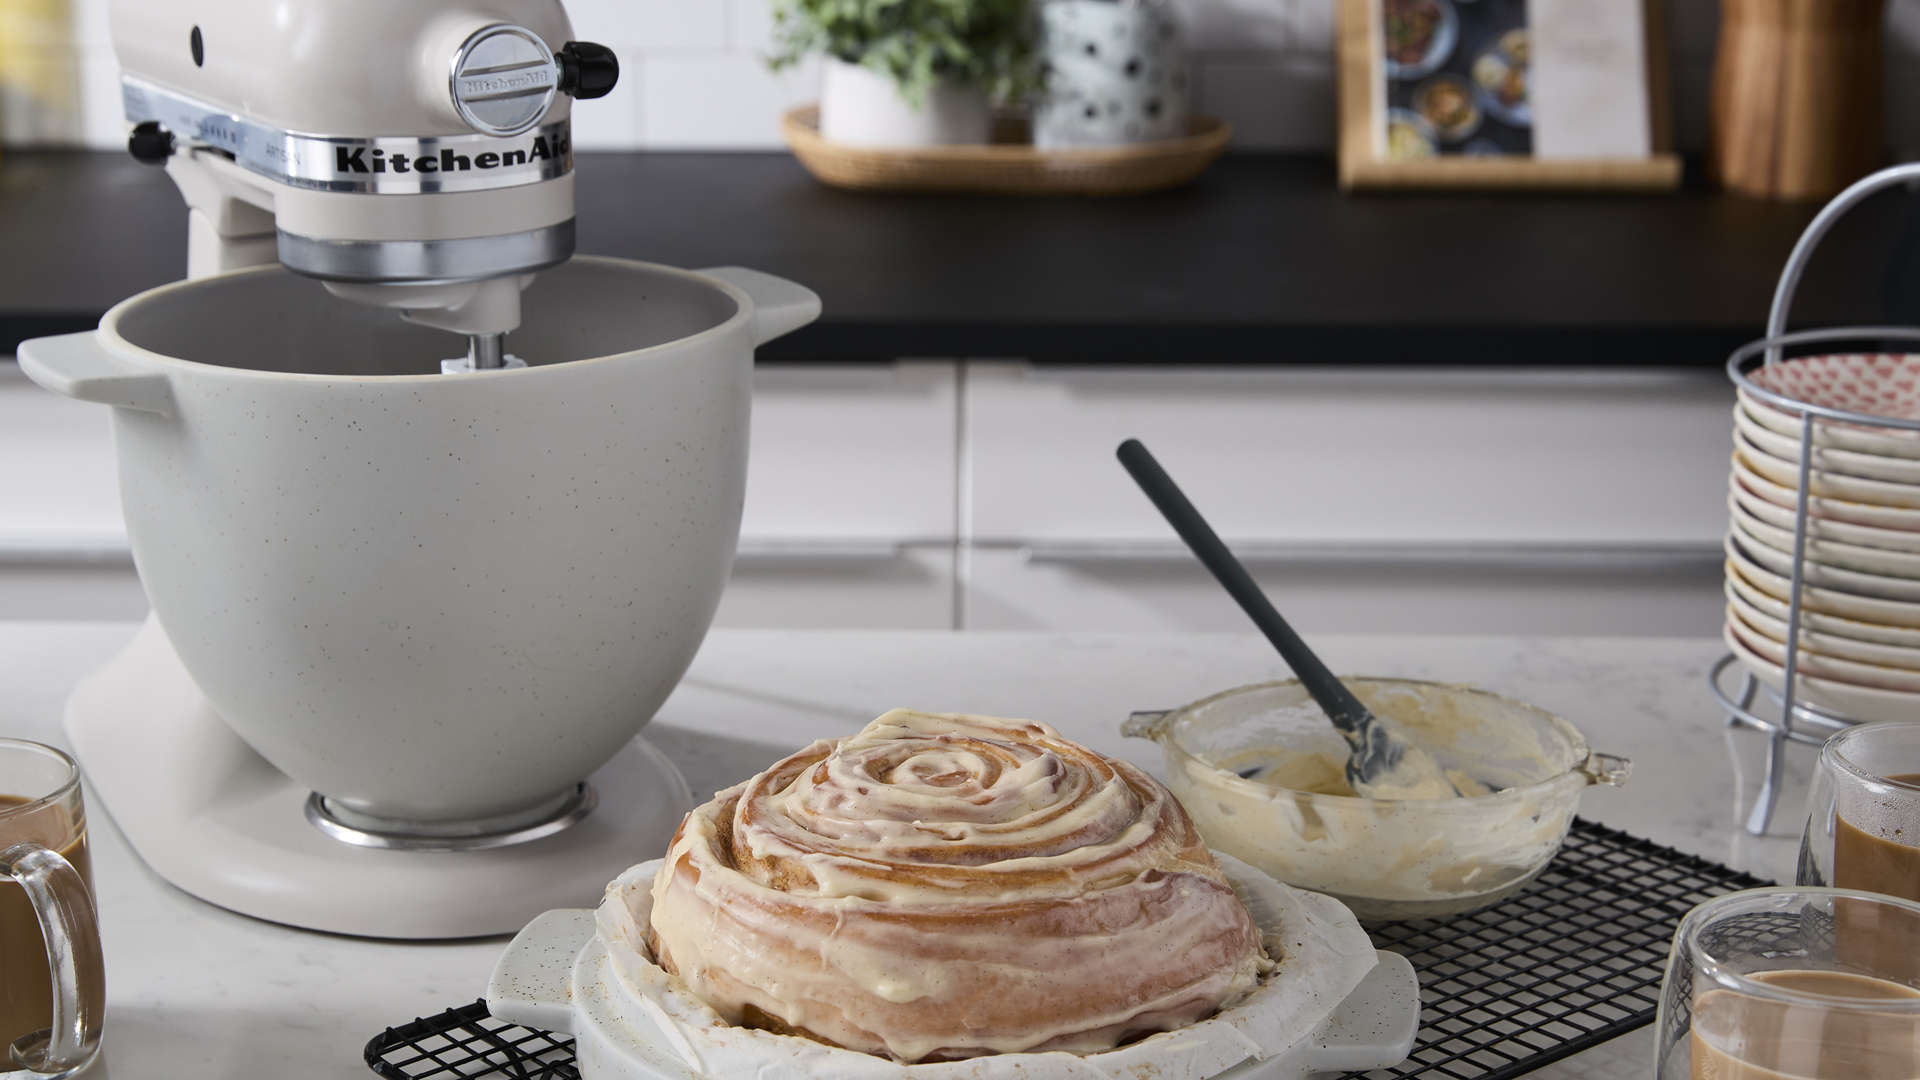 This new accessory for your KitchenAid mixer is a baking game changer